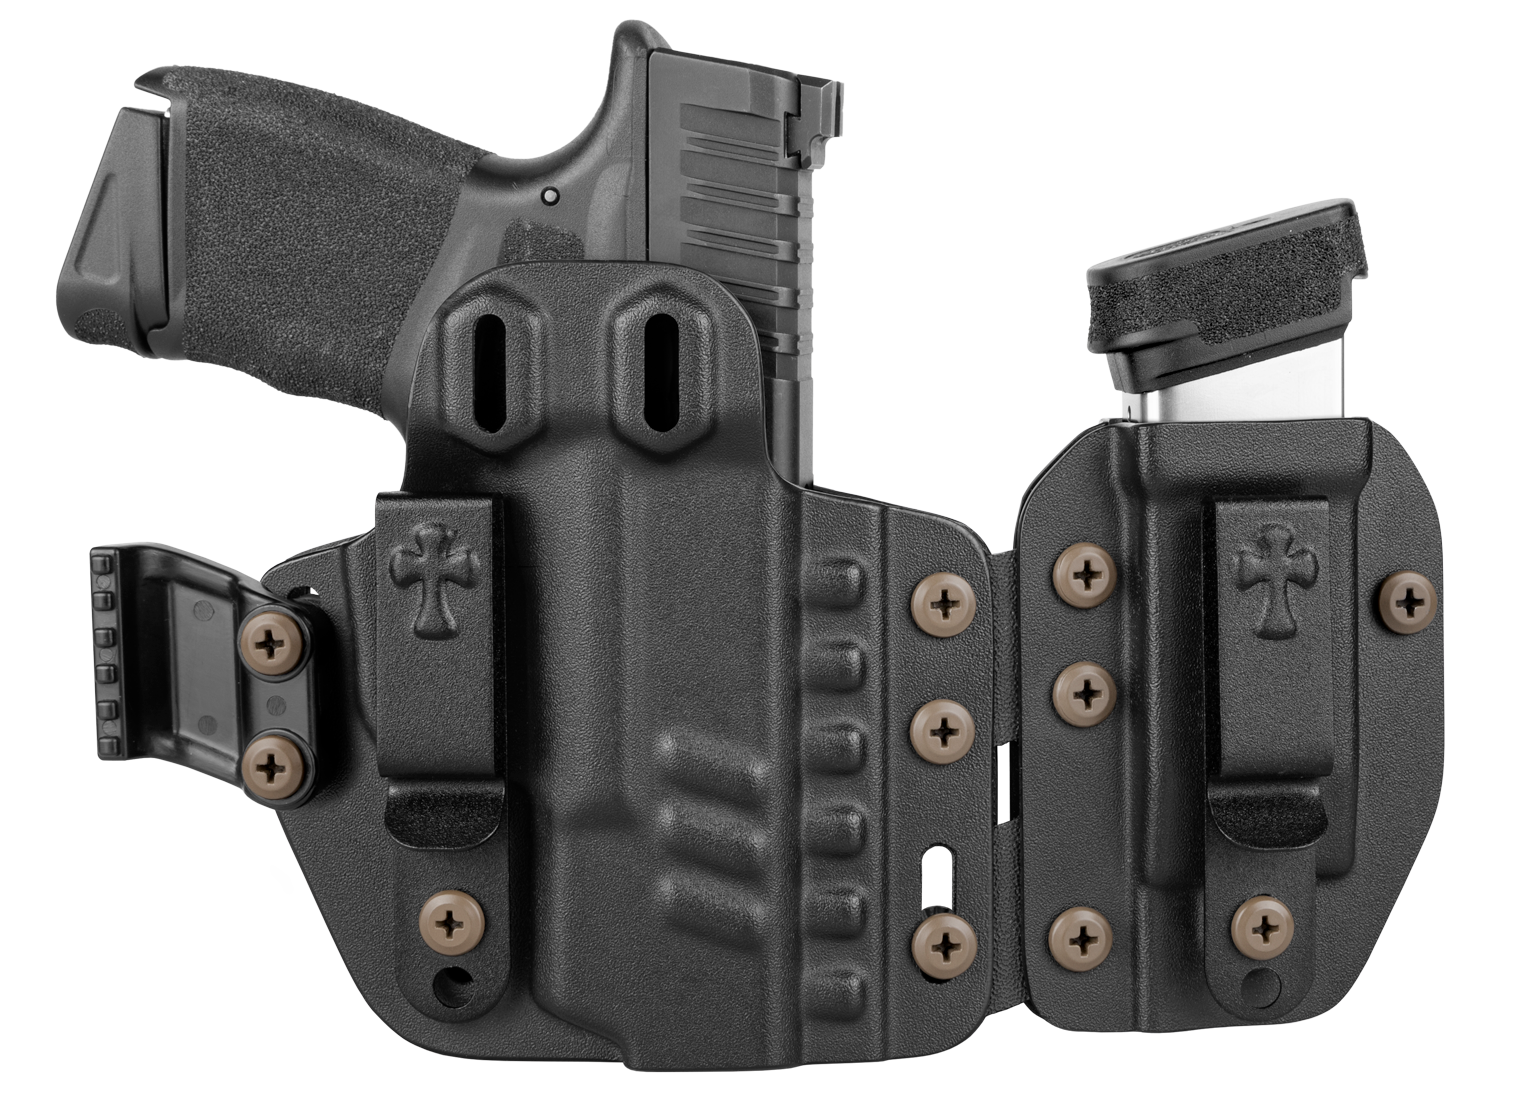 CrossBreed Holsters Rogue System with firearm